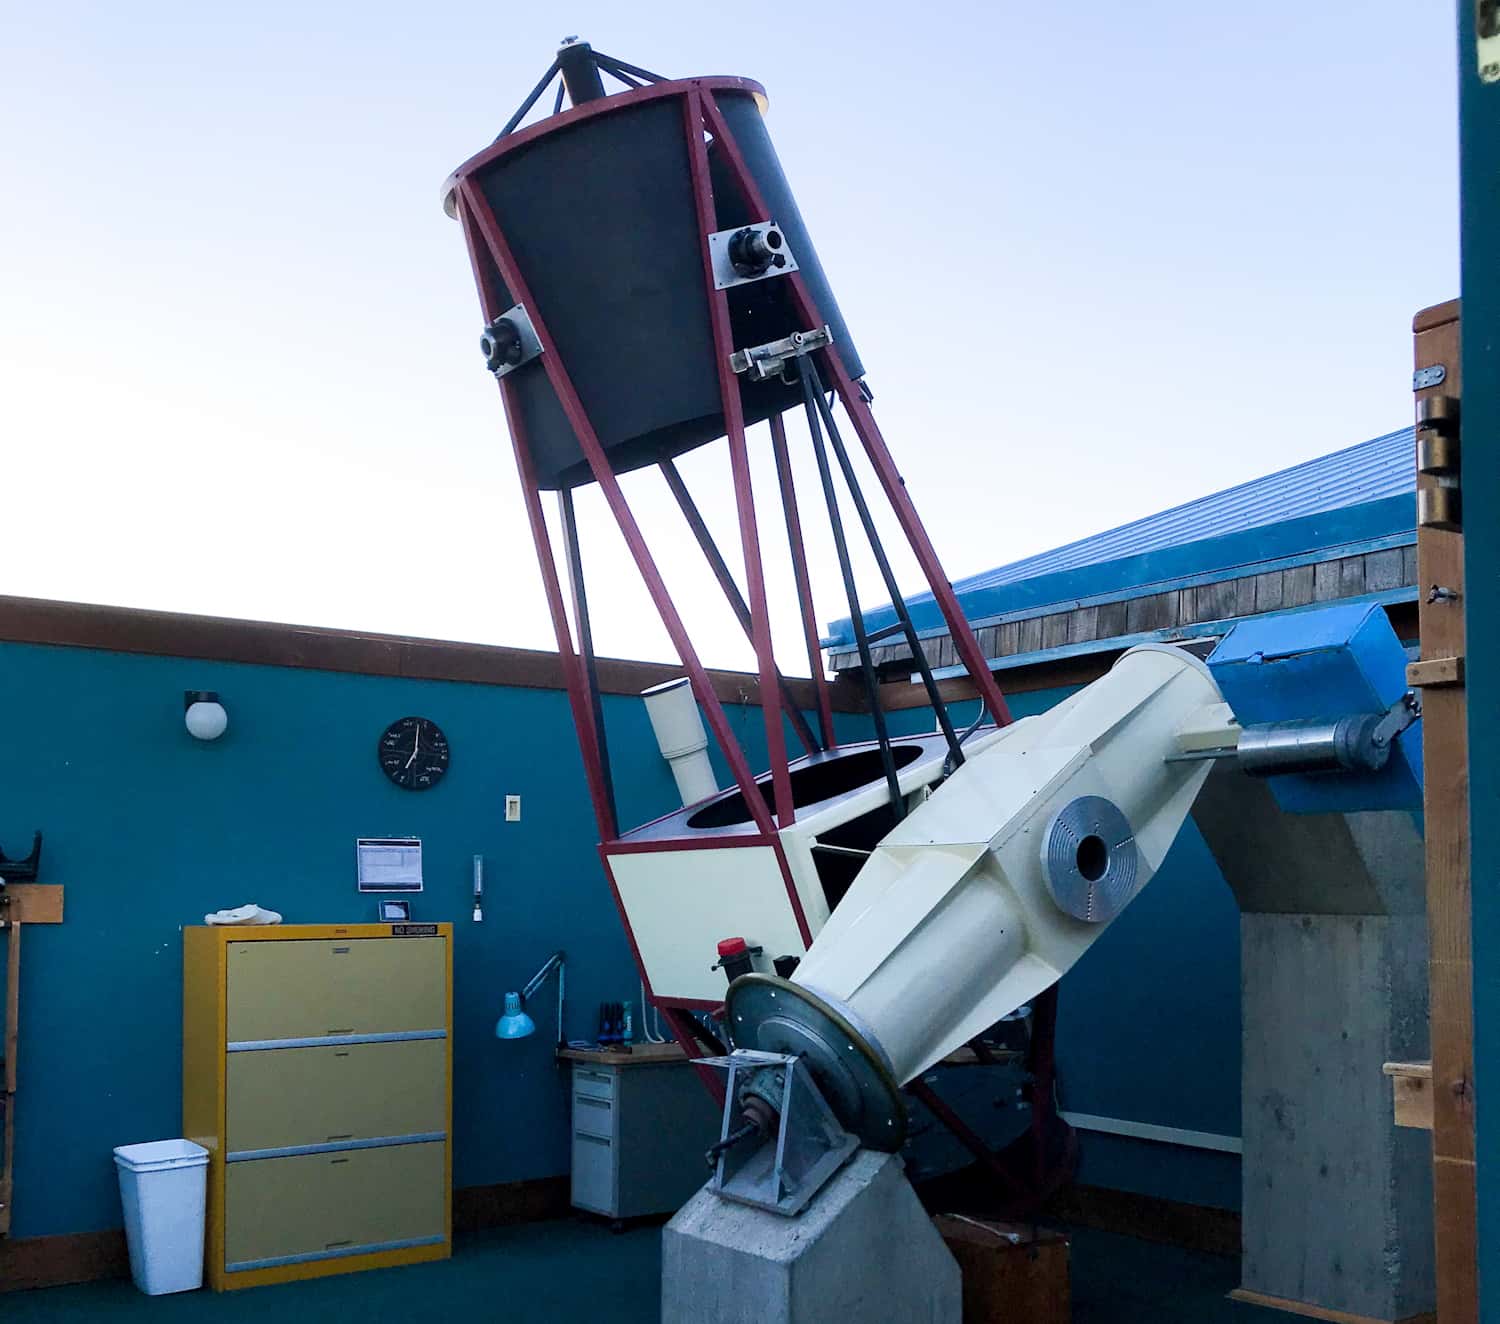 The 30-inch Challenger Telescope